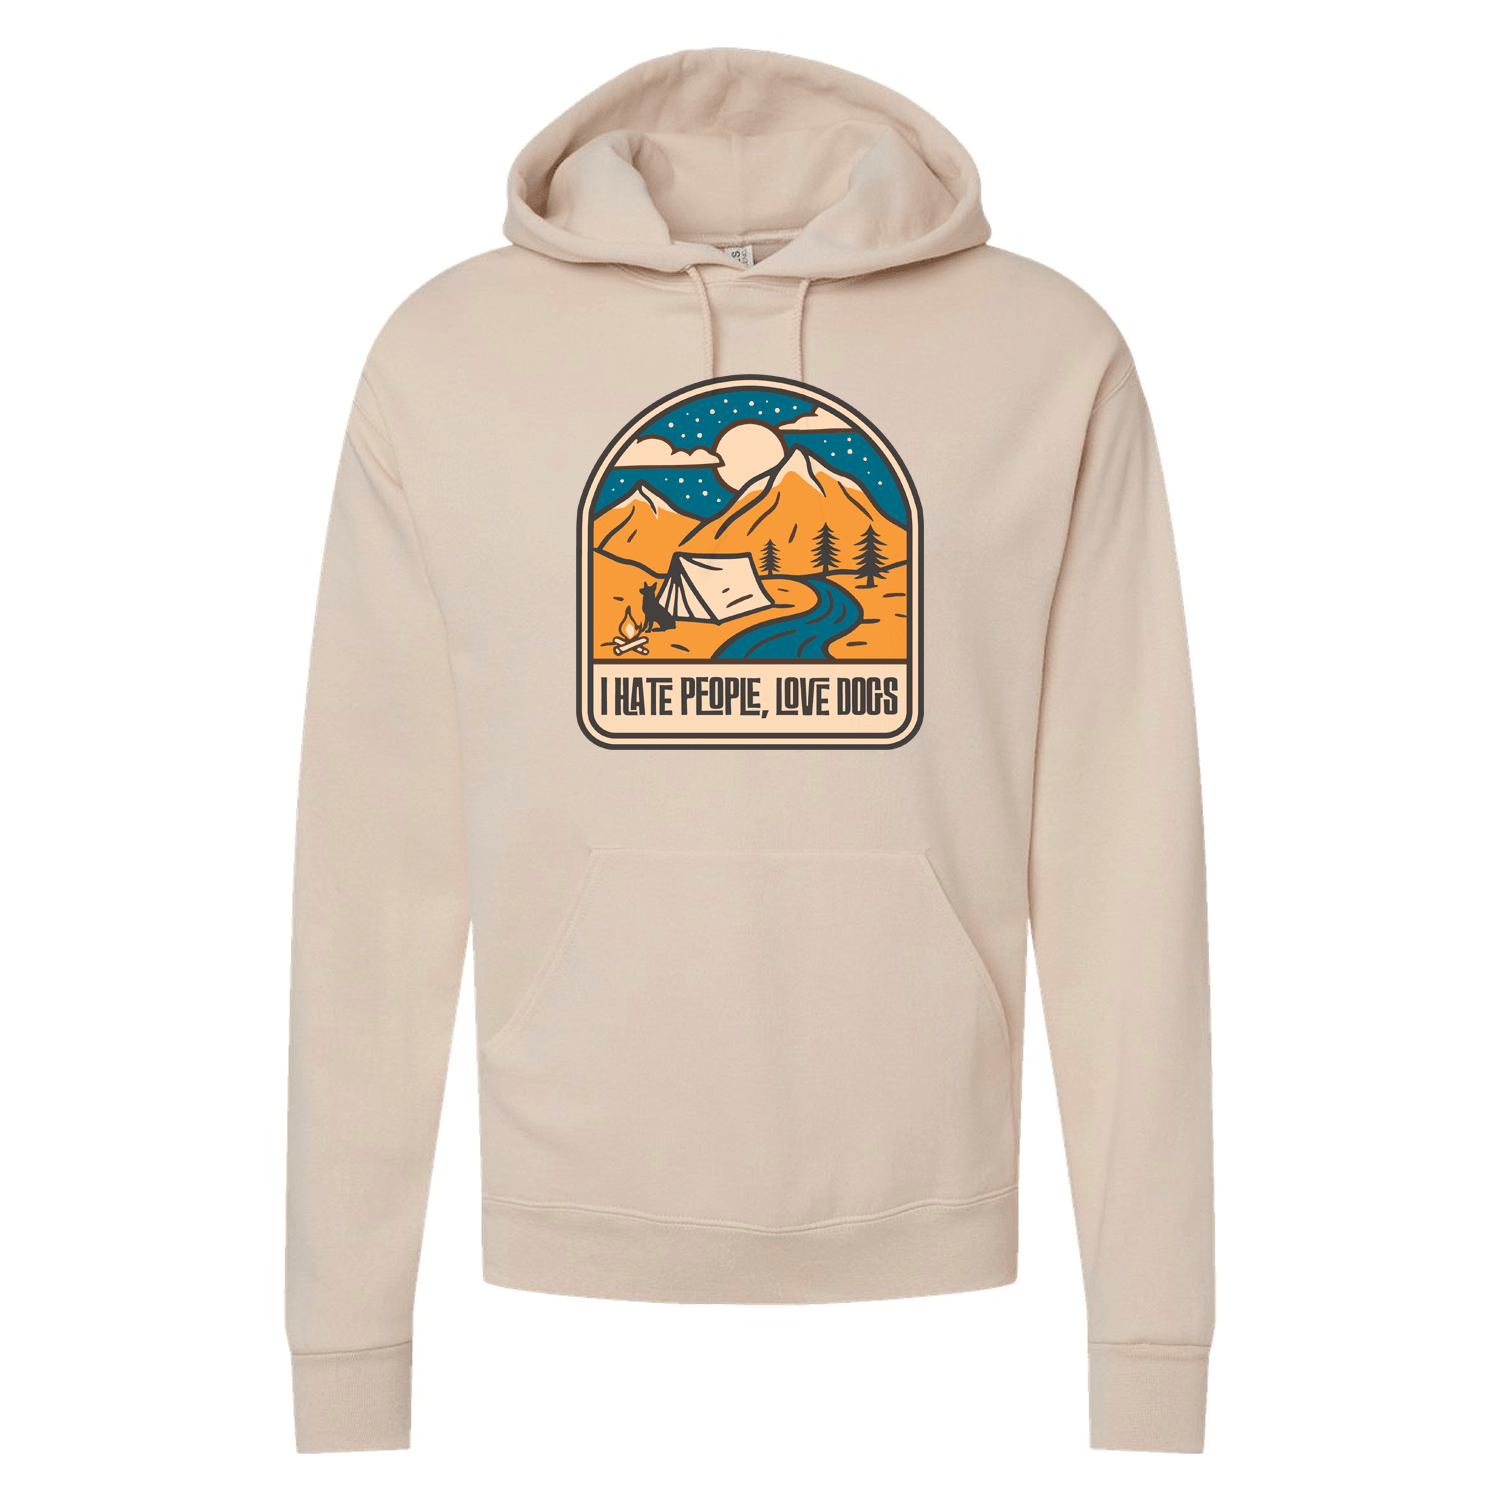 Hate people love dogs Hoodie - Ales to Trails